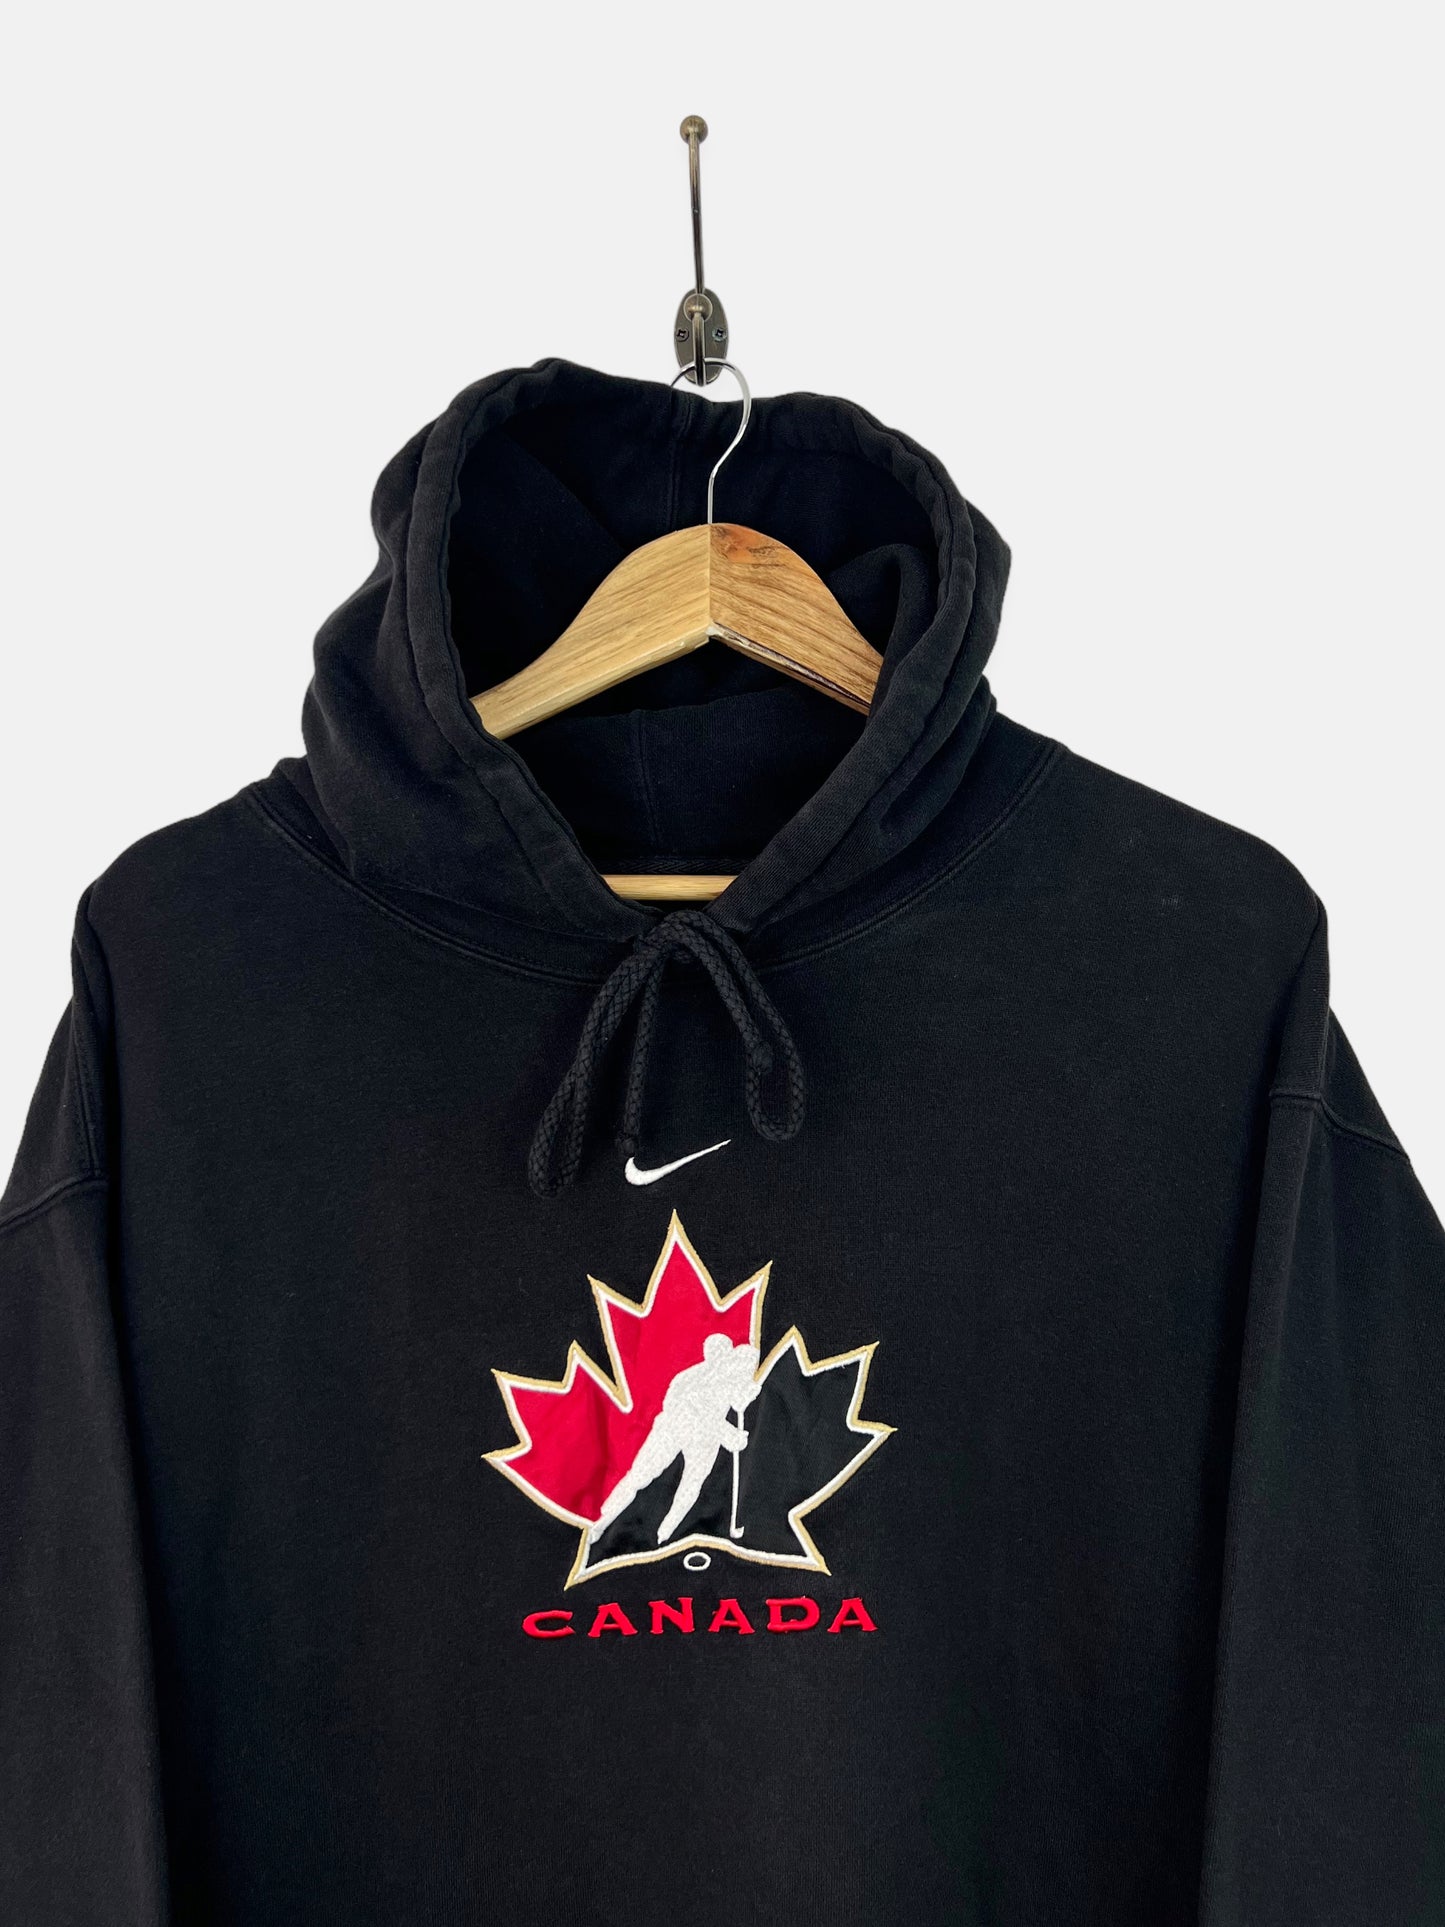 90's Nike Canada Ice Hockey Embroidered Vintage Hoodie Size L-XL